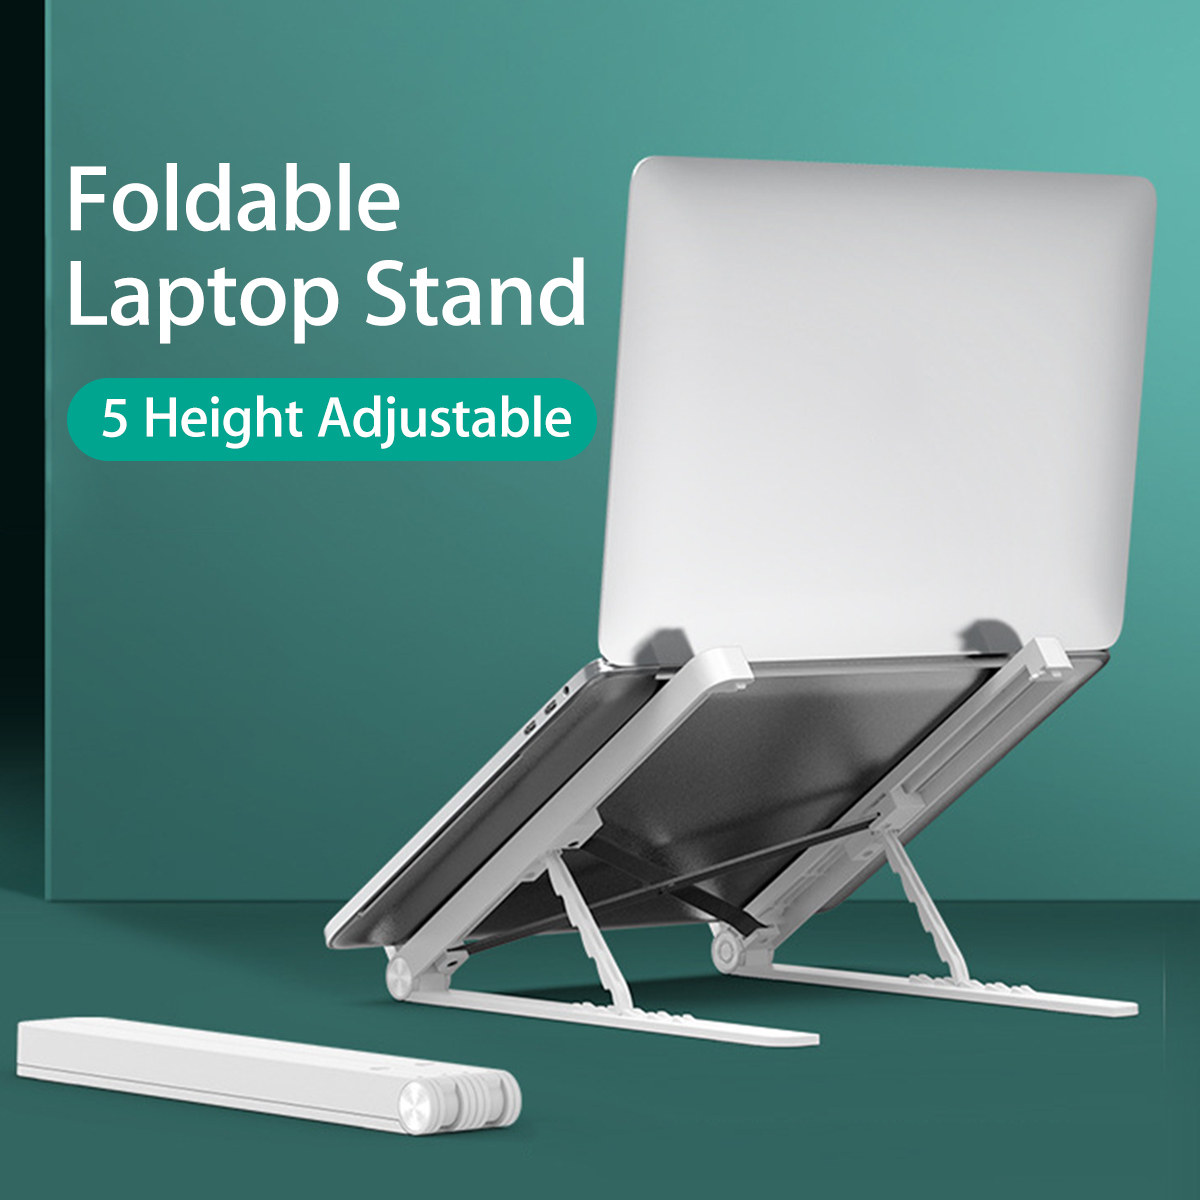 Foldable-5-Height-Adjustable-Laptop-Stand-Tablet-Stand-Heat-Dissipation-for-iPad-Macbook-below-17-in-1700967-1